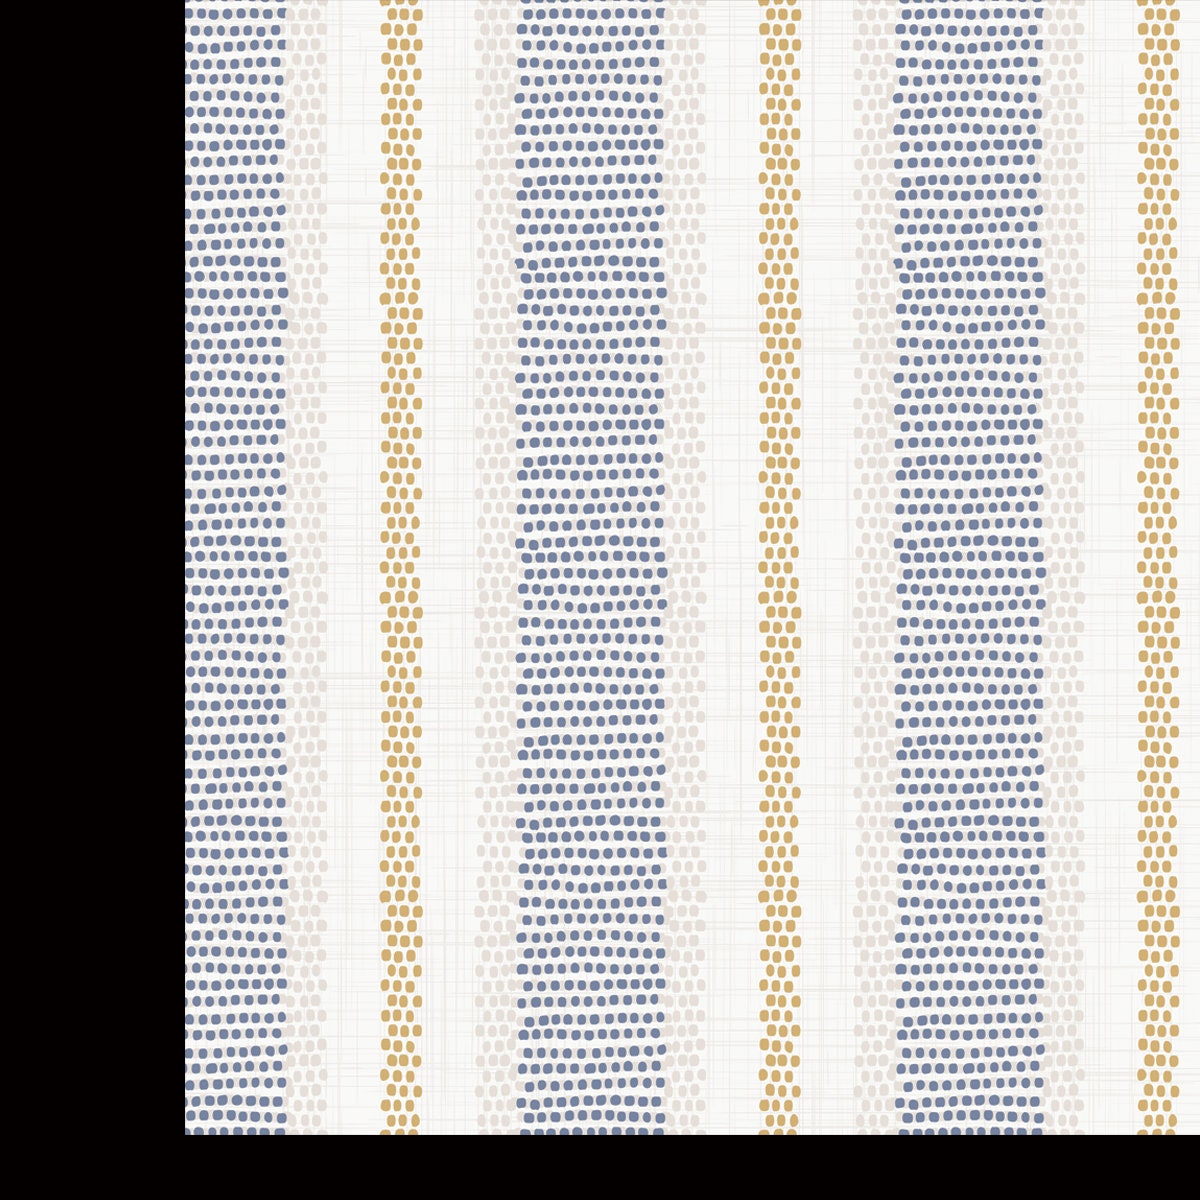 French Farmhouse Stripe Pattern. Provence Blue White Linen Woven Texture. Shabby Chic Style Weave Stitch Background Wallpaper Kitchen Mural